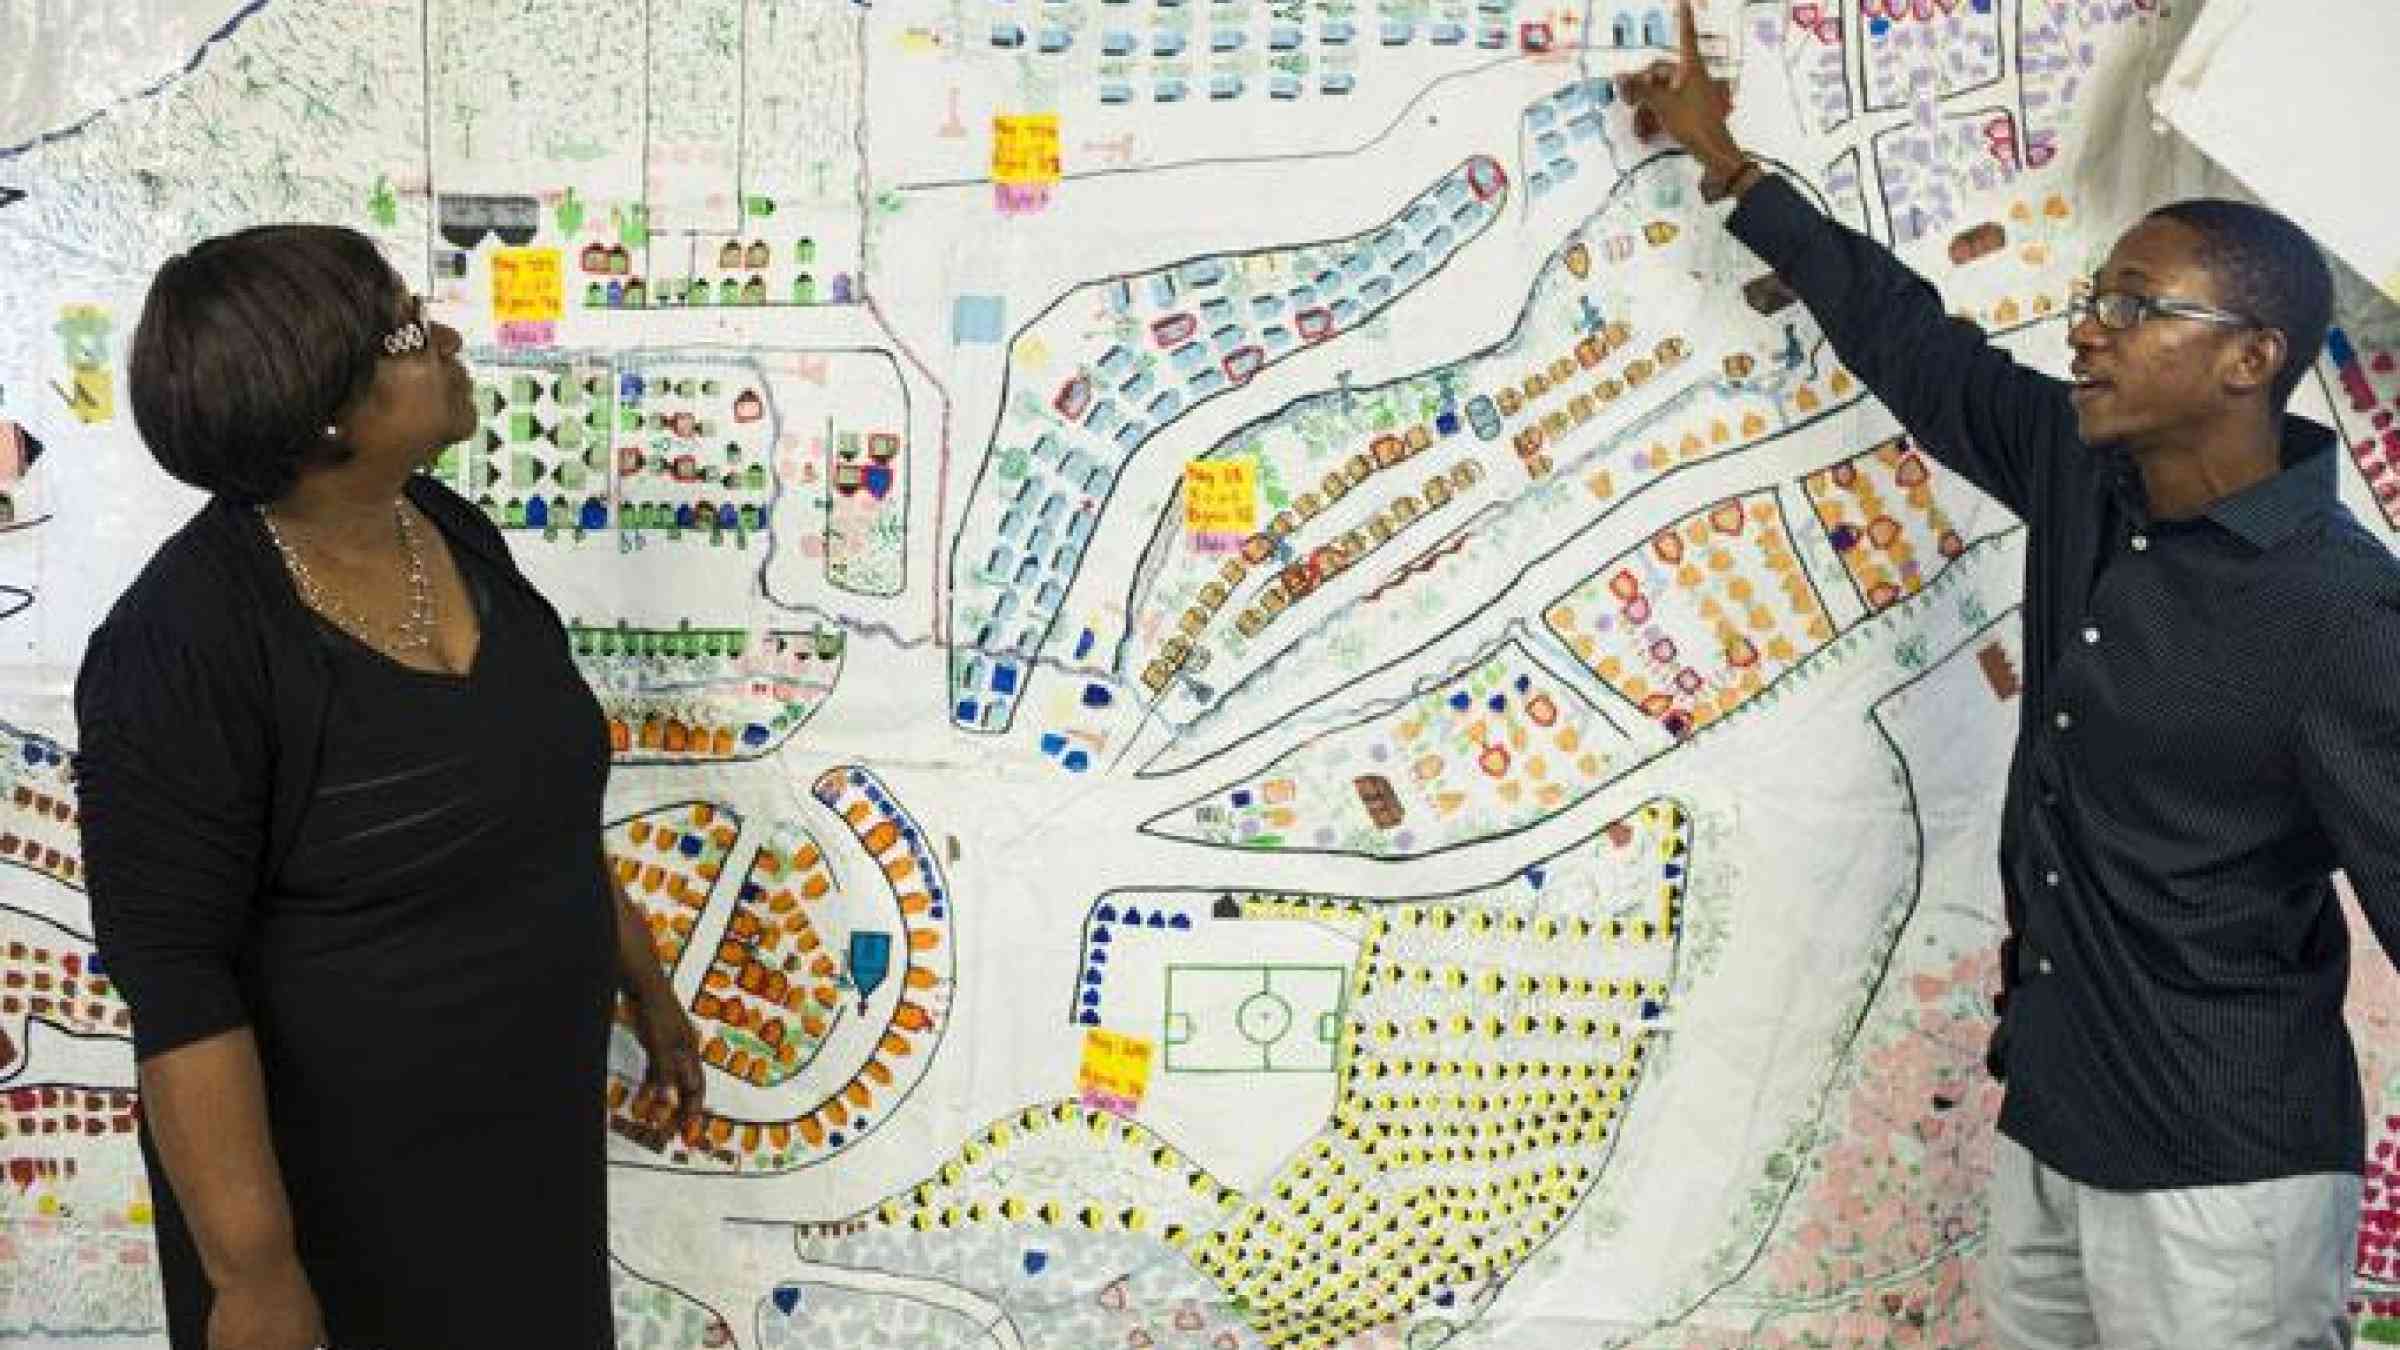 Marie Alta Jean-Baptiste and her colleague Ralph Emmanuel explain the community-led creation of this map of the Caradeux community. Photo: Anna Fawcus / Oxfam America